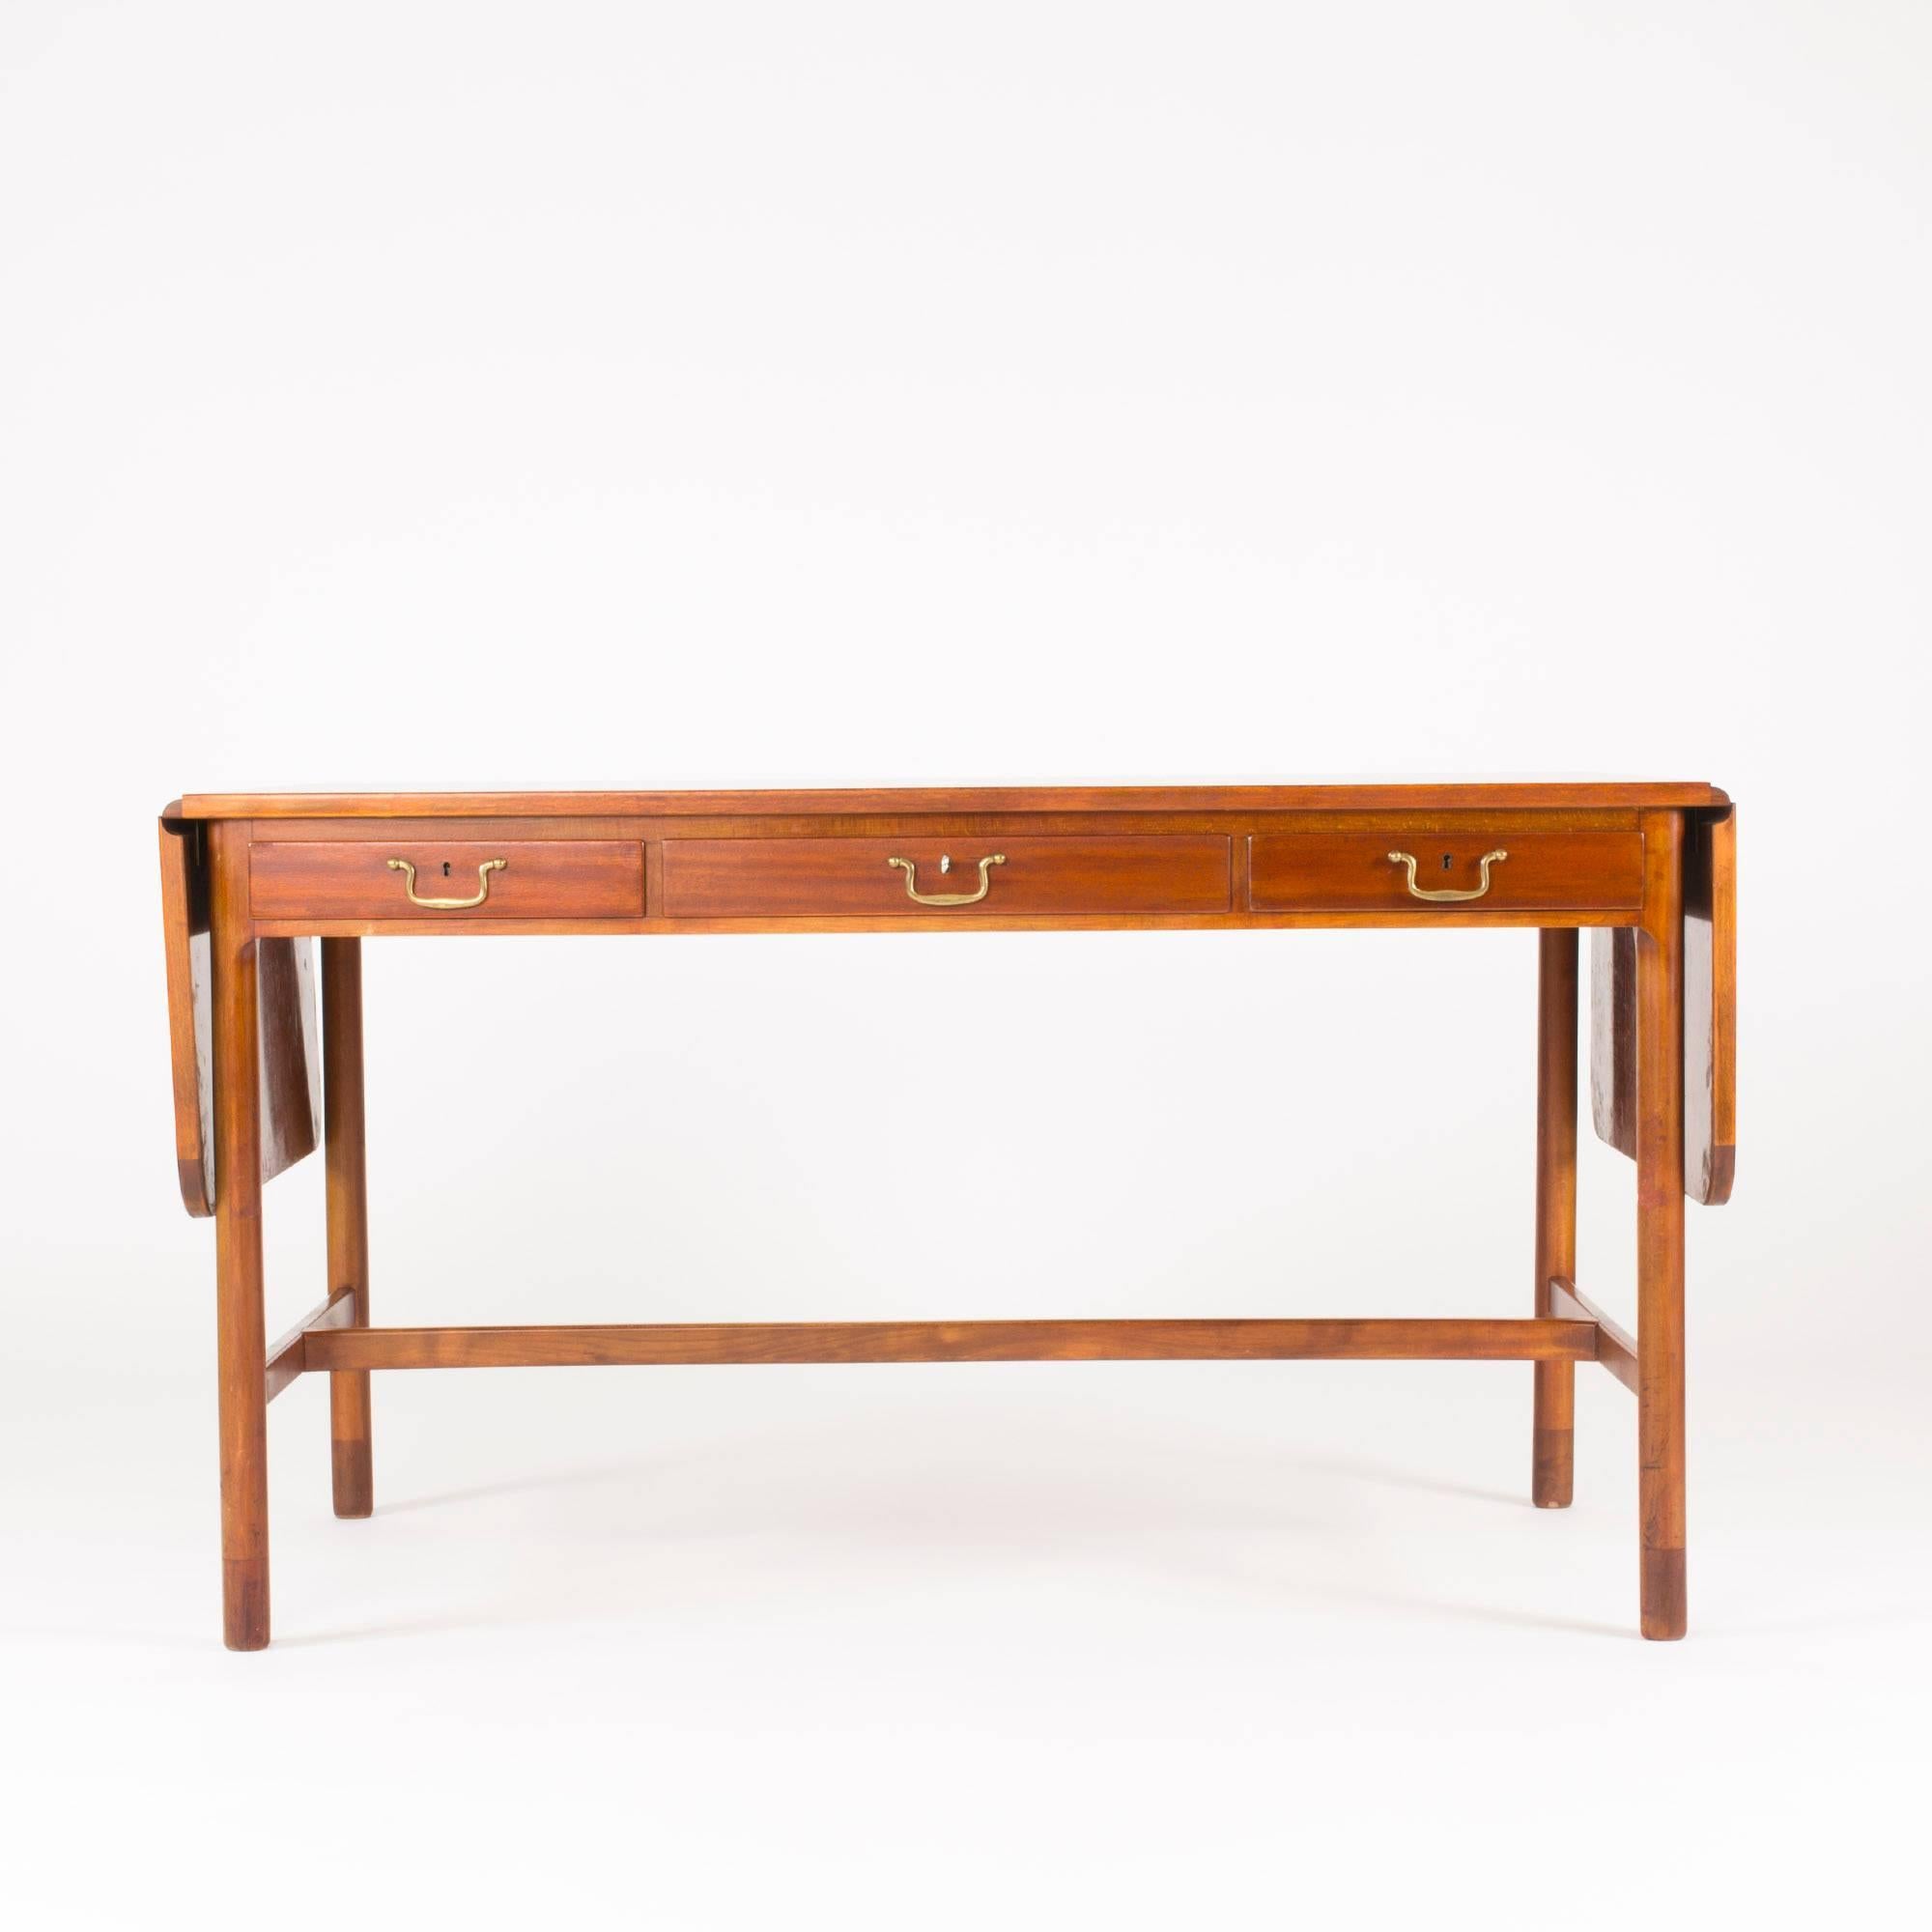 Very elegant mahogany desk by Josef Frank. Drop leaves on the sides make it possible to extend the length to 202 cm. Three drawers with brass handles.